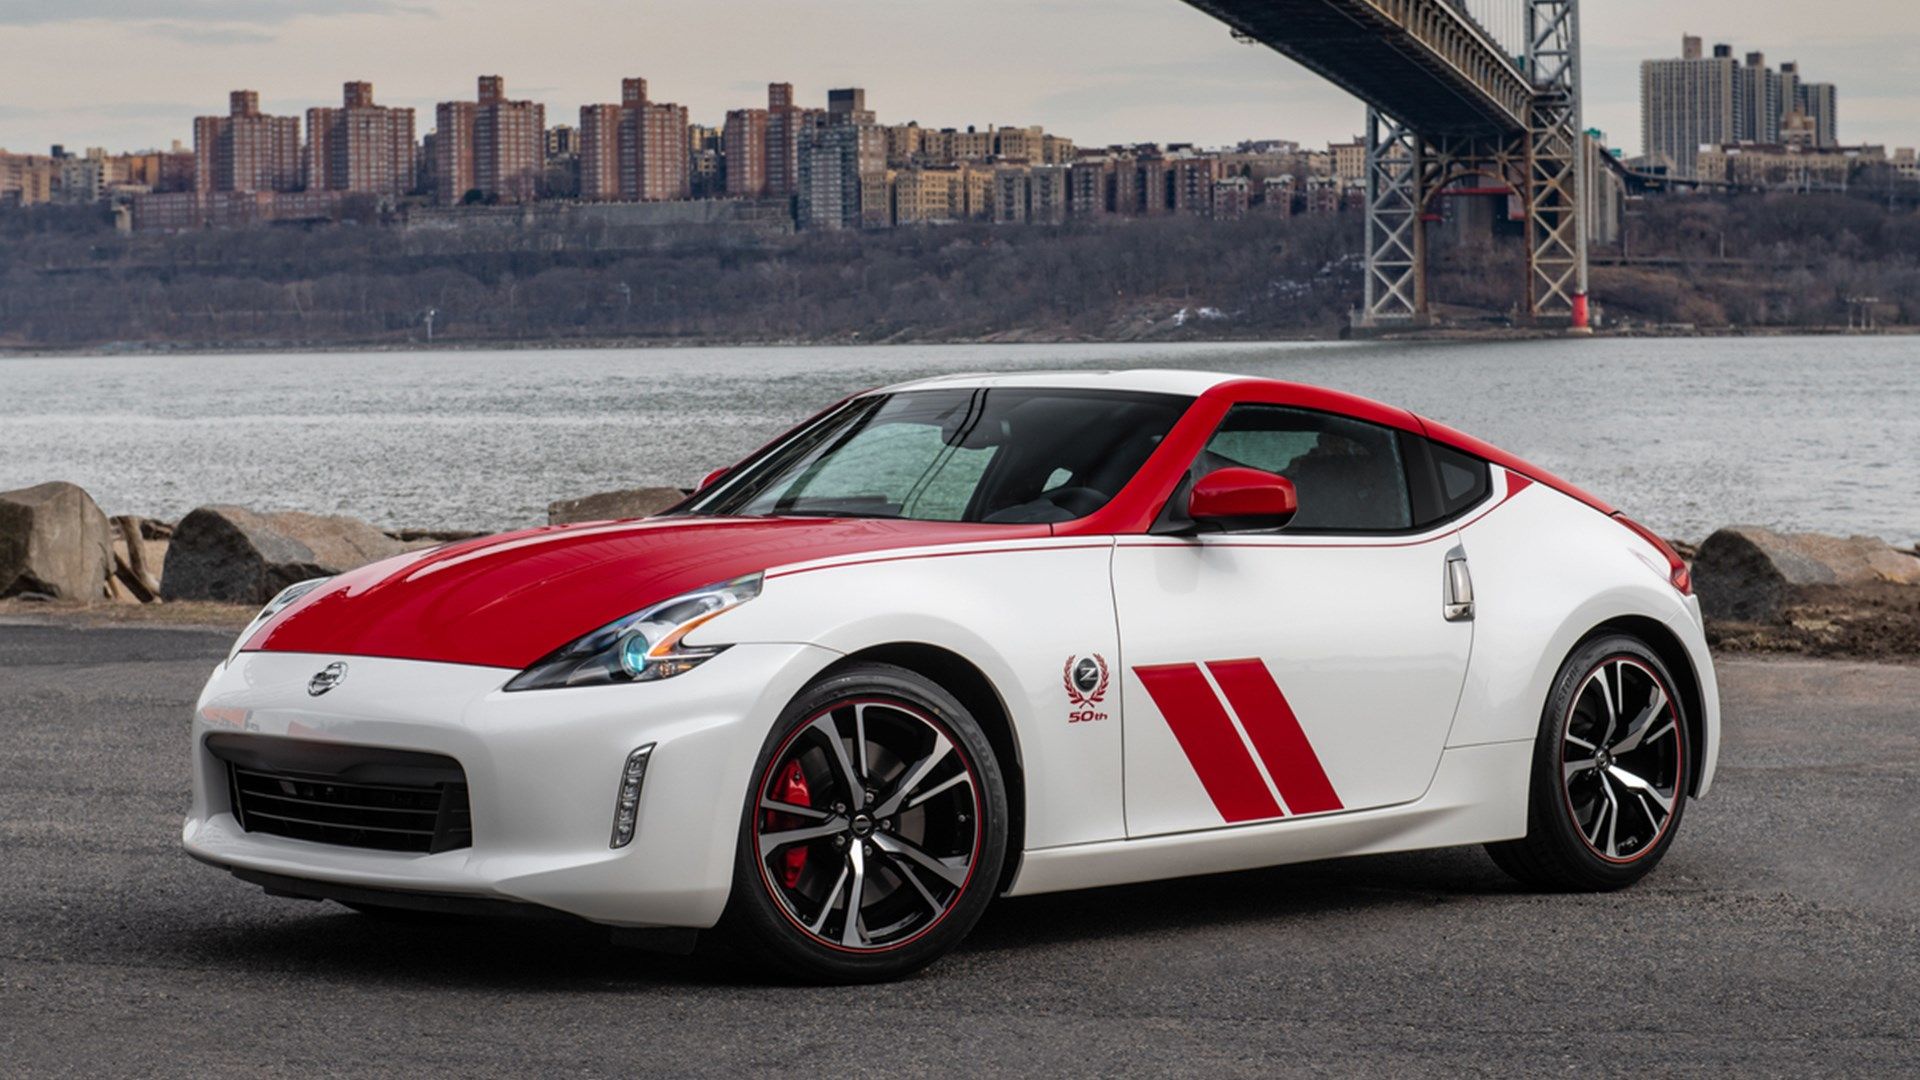 Nissan Celebrates Racing Heritage With 50th Anniversary 370Z